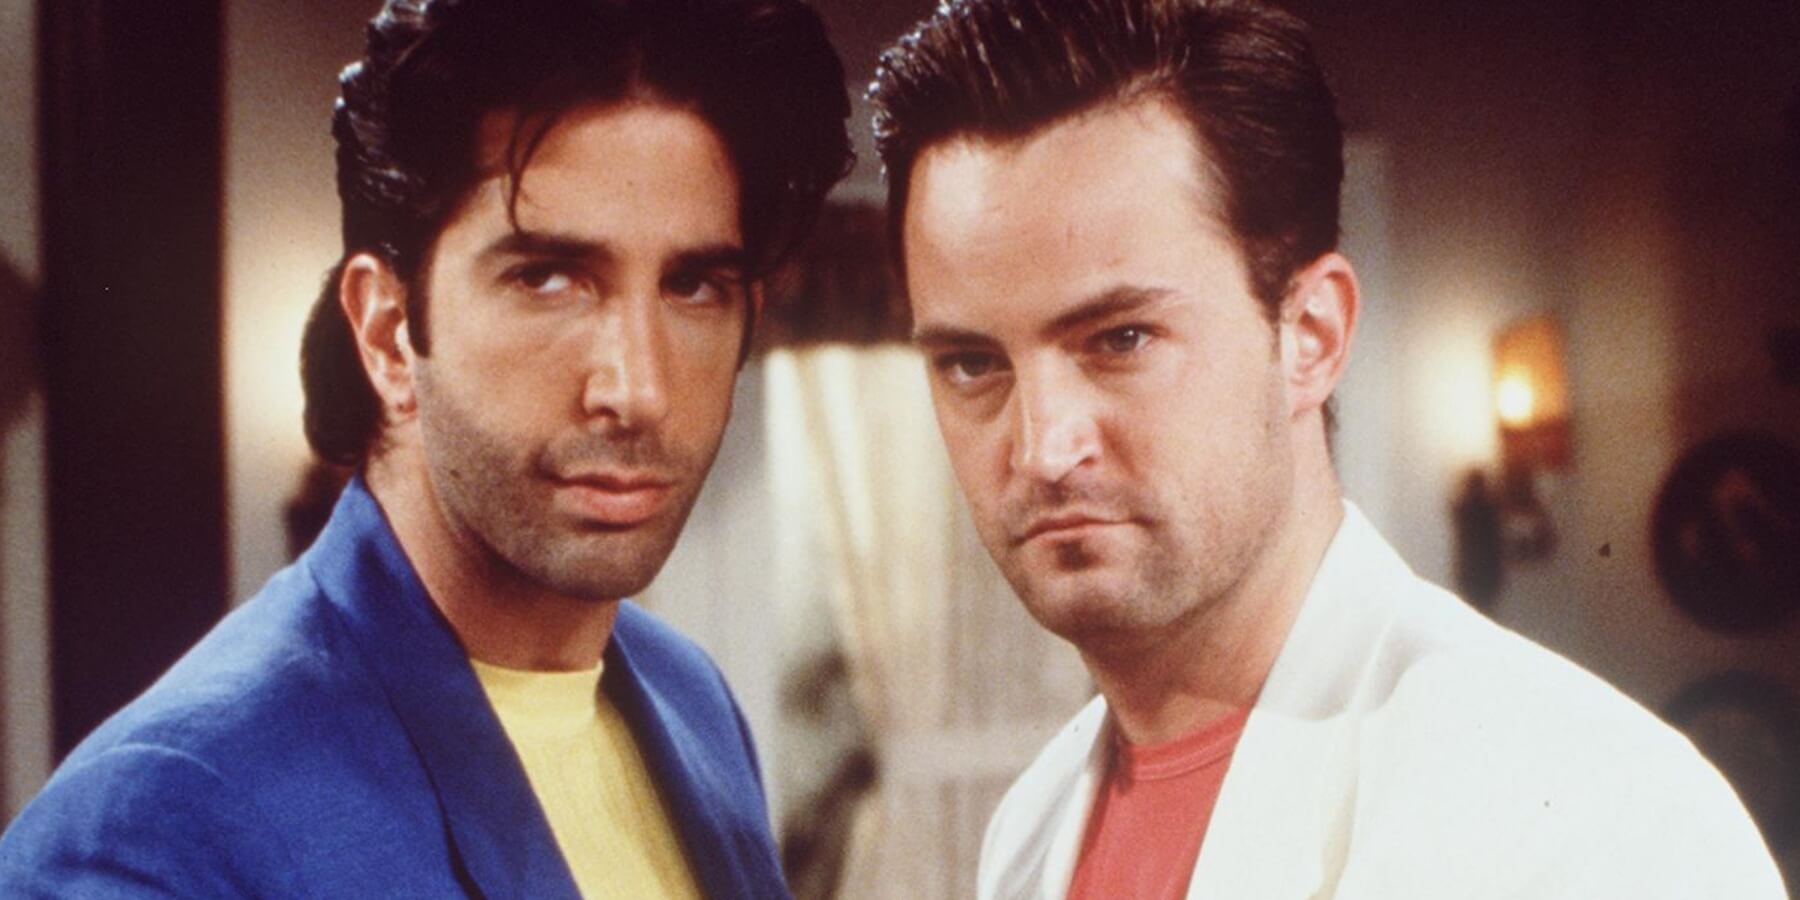 David Schwimmer and Matthew Perry dress as 'Miami Vice' during a 'Friends' flashback episode.